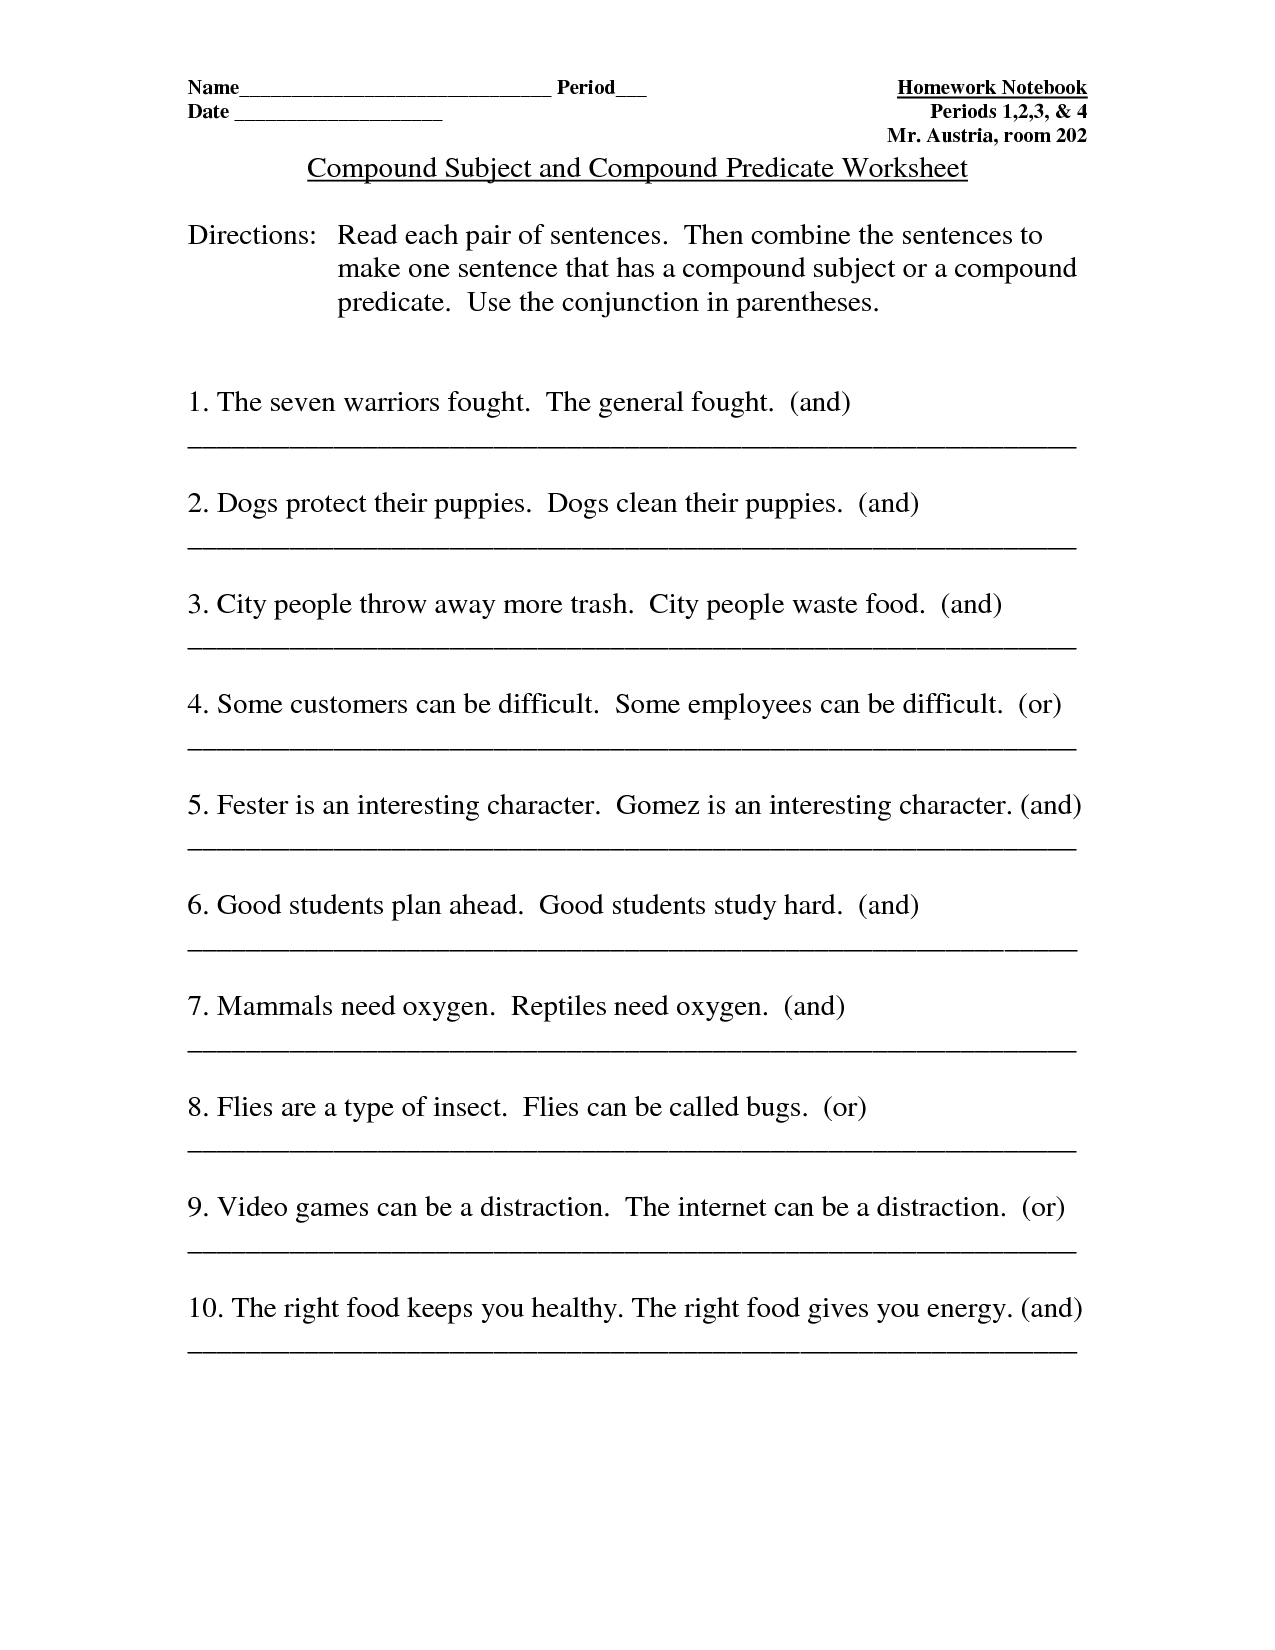 Compound Subjects And Predicate Worksheets